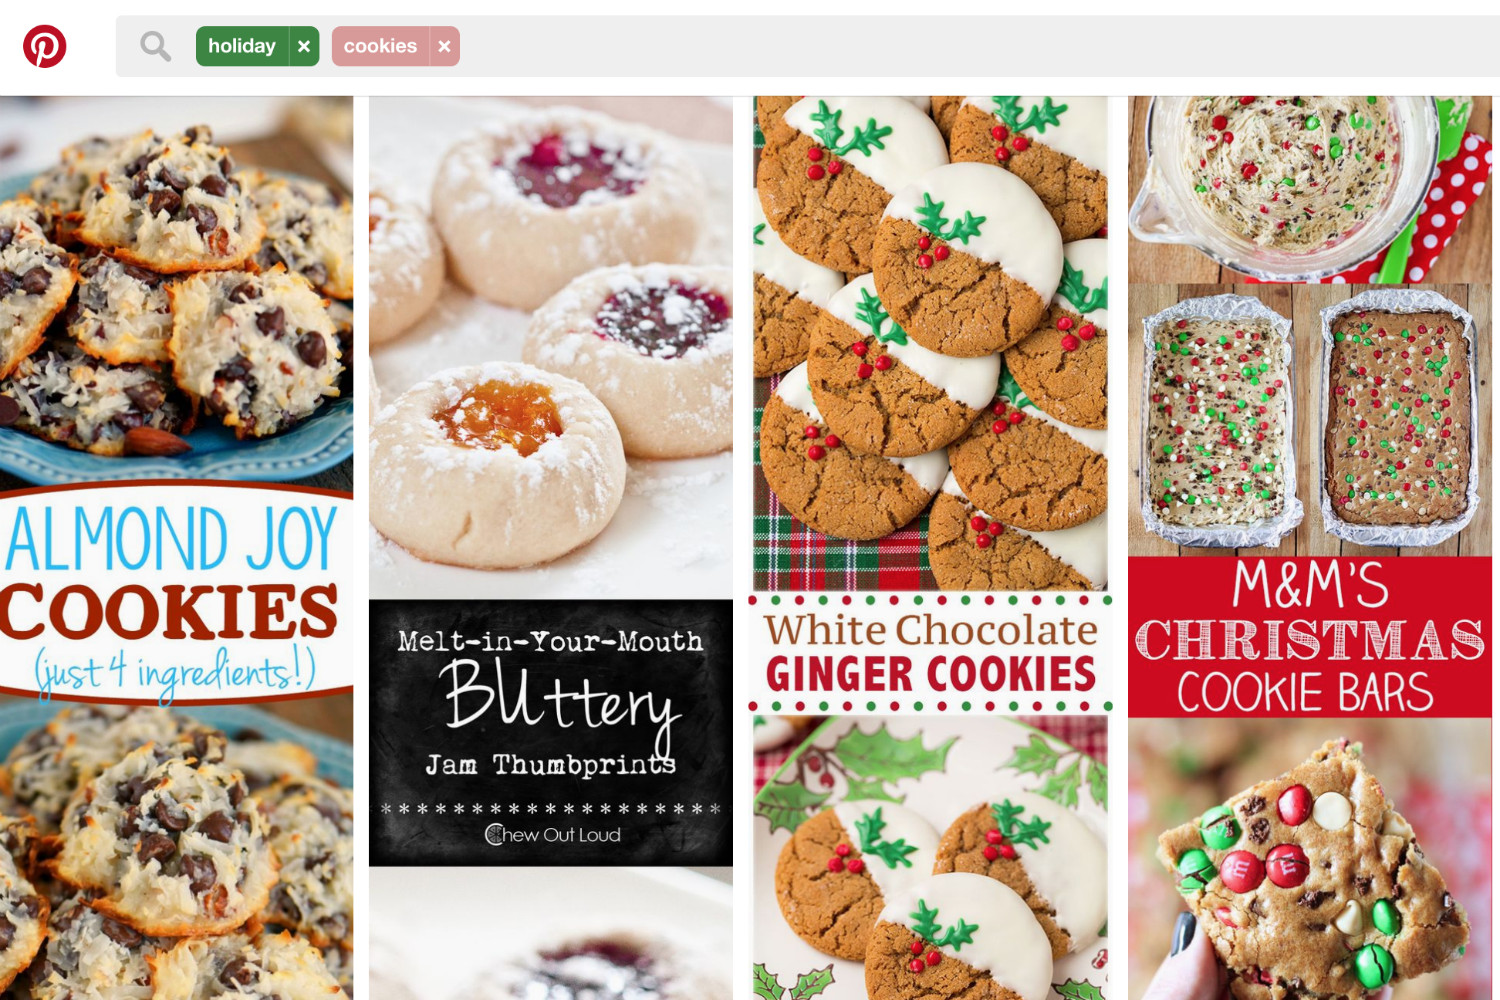 Most Popular Christmas Cookies Recipes
 What is Pinterest’s most popular Christmas cookie recipe